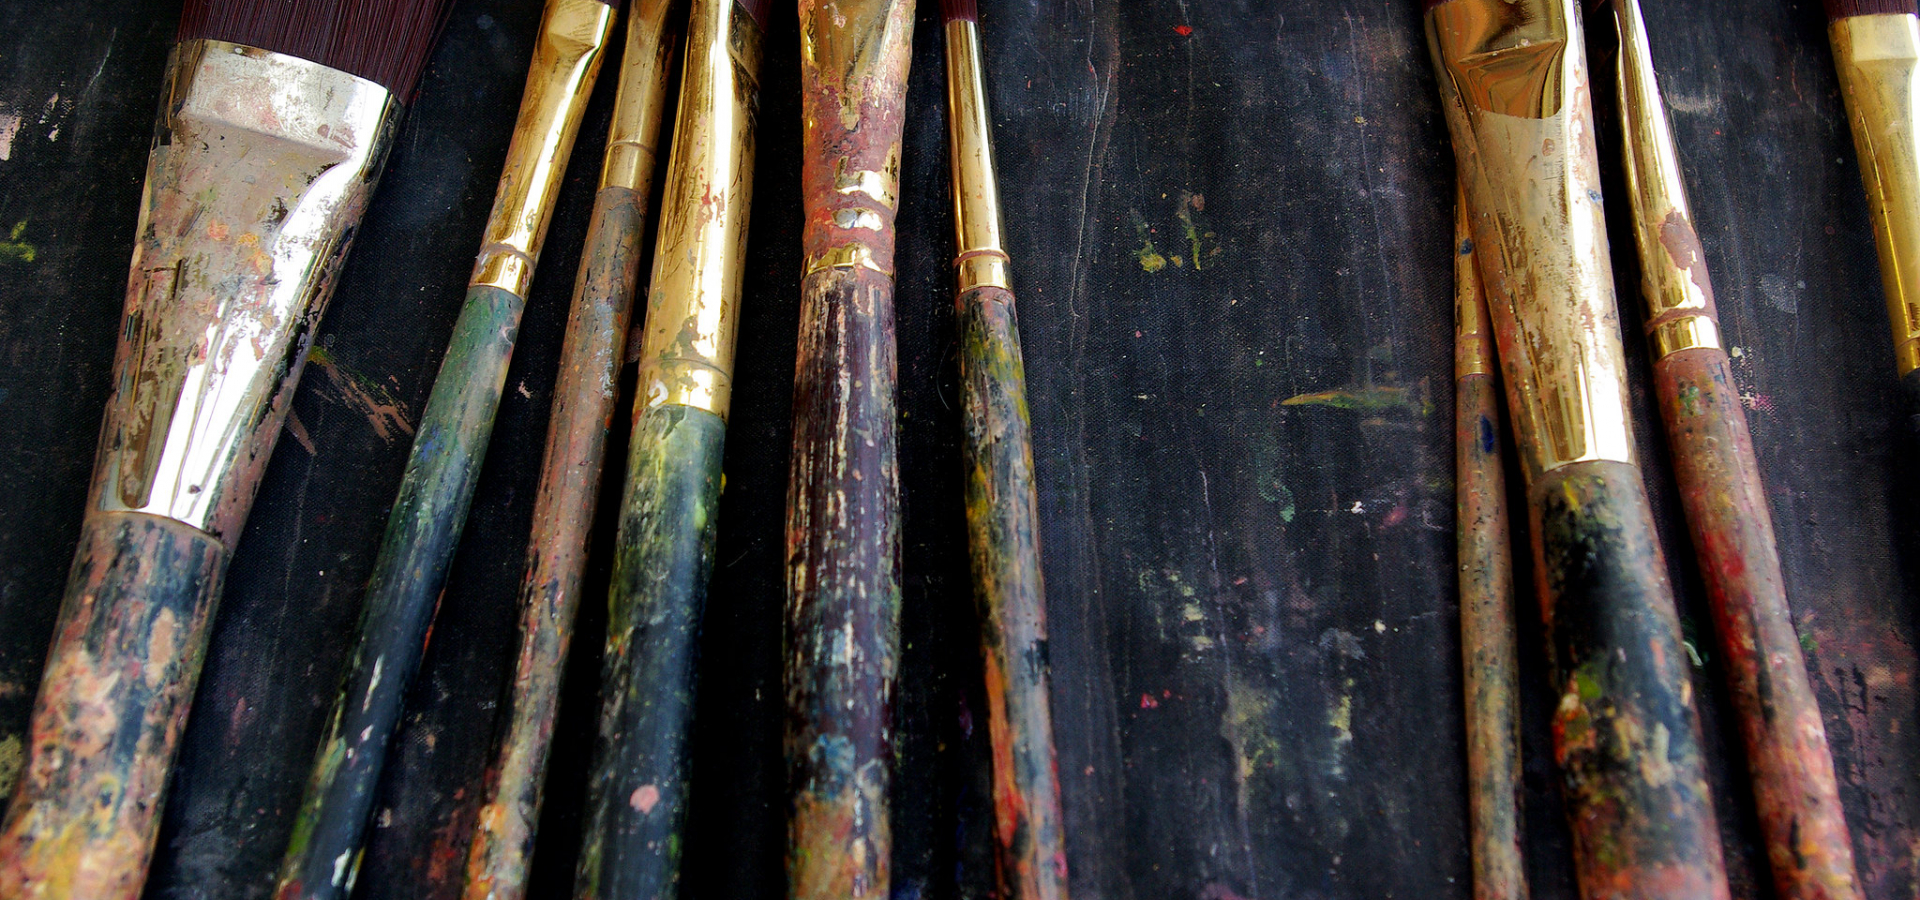 Paintbrushes and paint